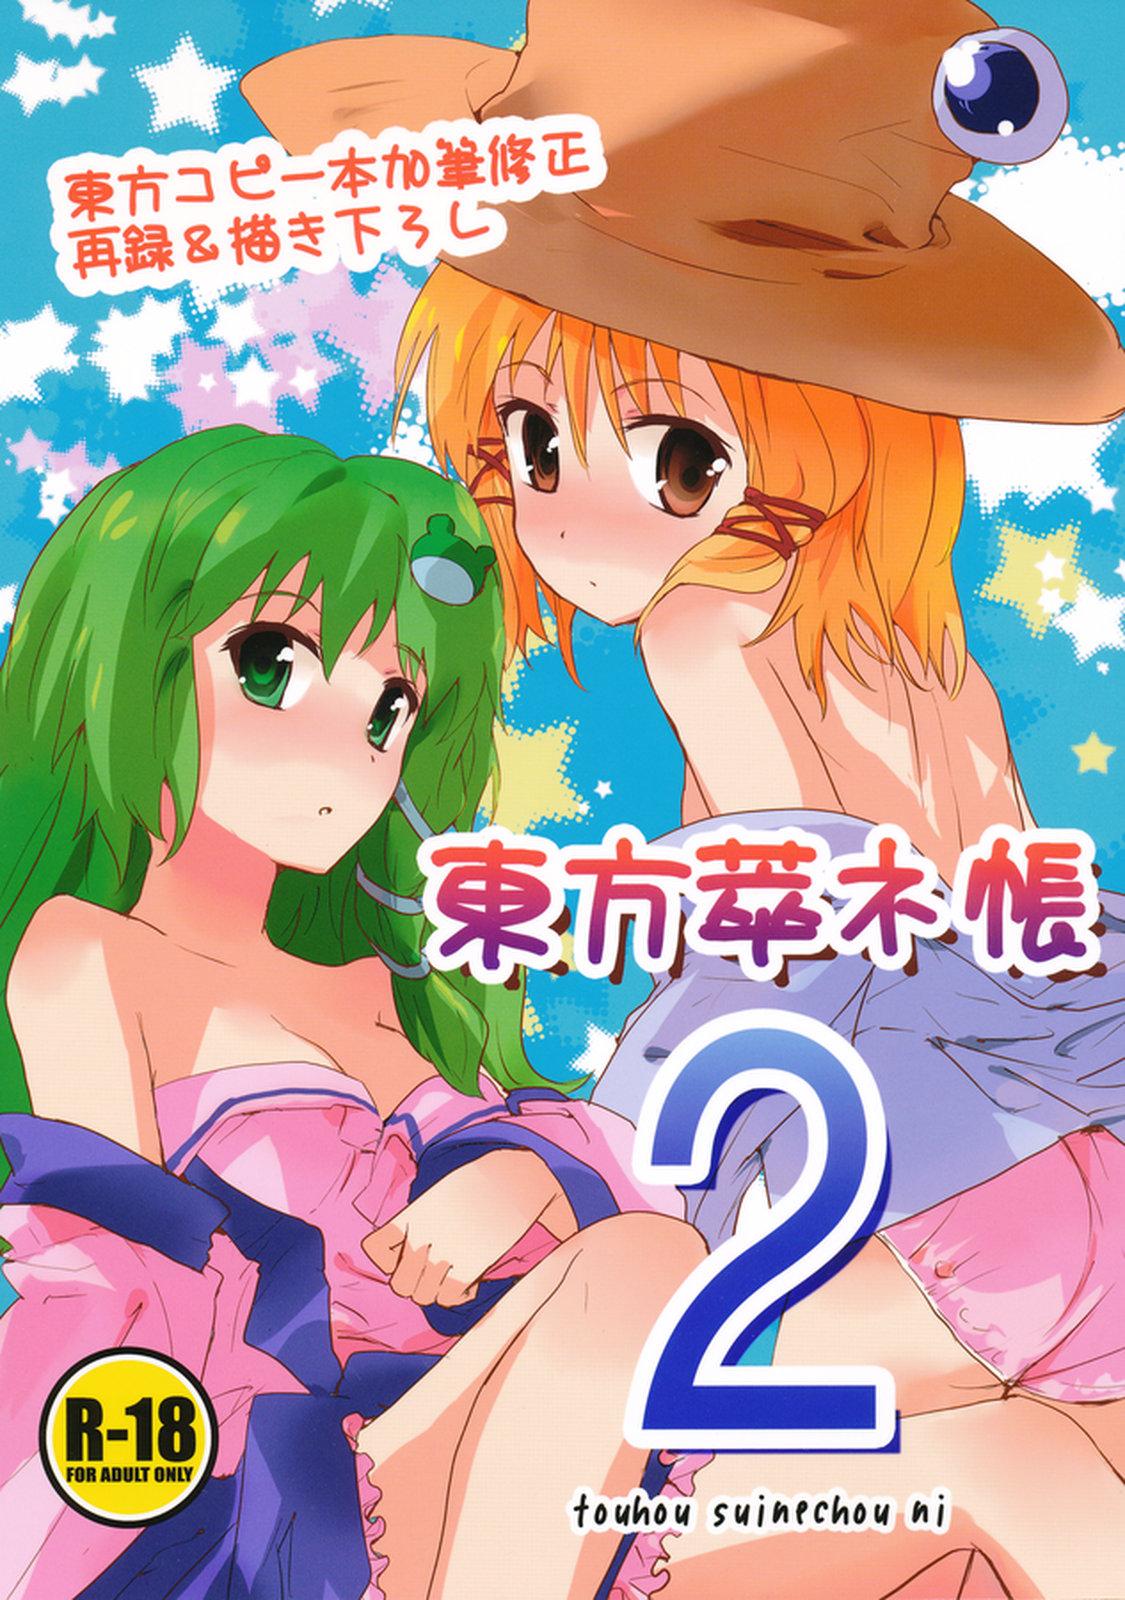 Tiny Tits Touhou Suinechou 2 - Touhou project Pigtails - Picture 1